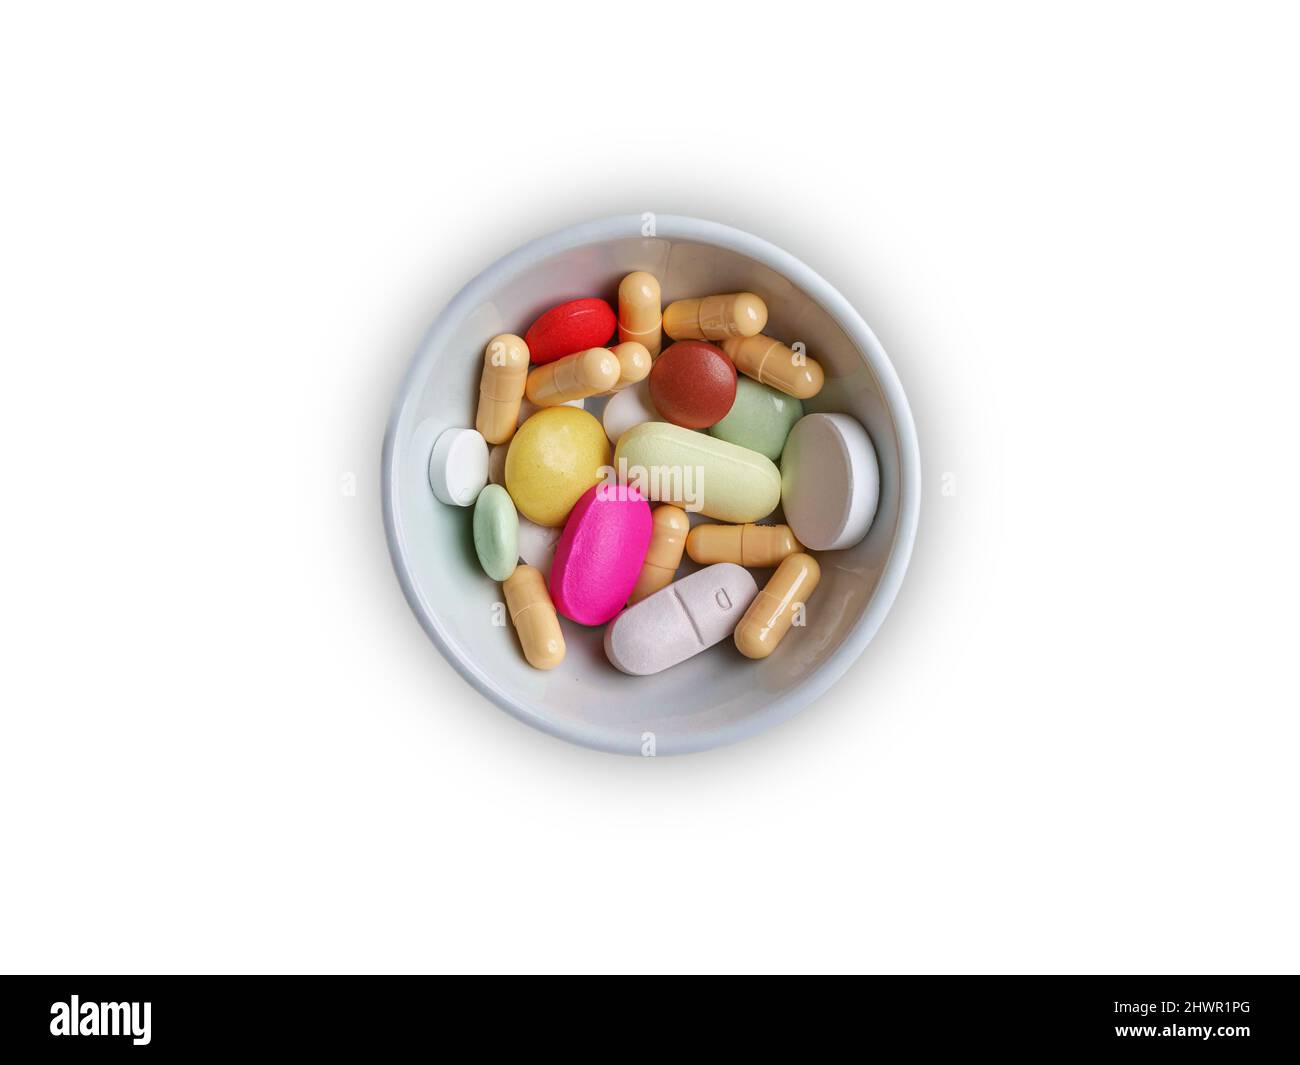 A white bowl of various colorful pills and capsules isolated on white background. Stock Photo